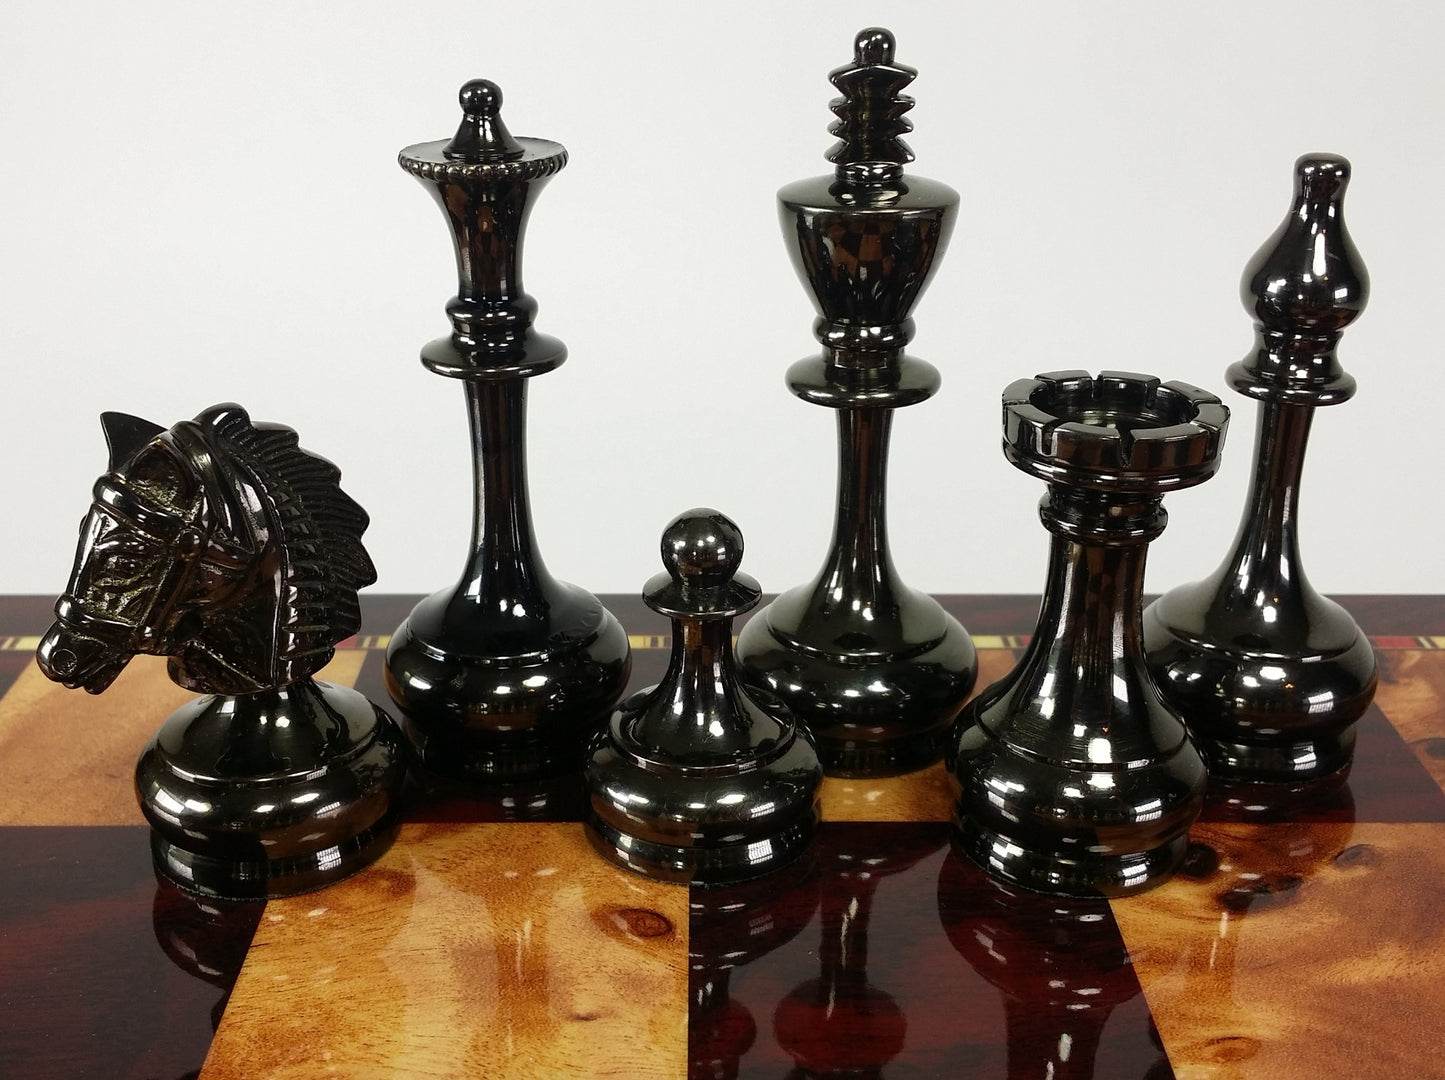 Real Brass Metal Black Gold Staunton Bridled Knight Chess Set Cherry Color Board